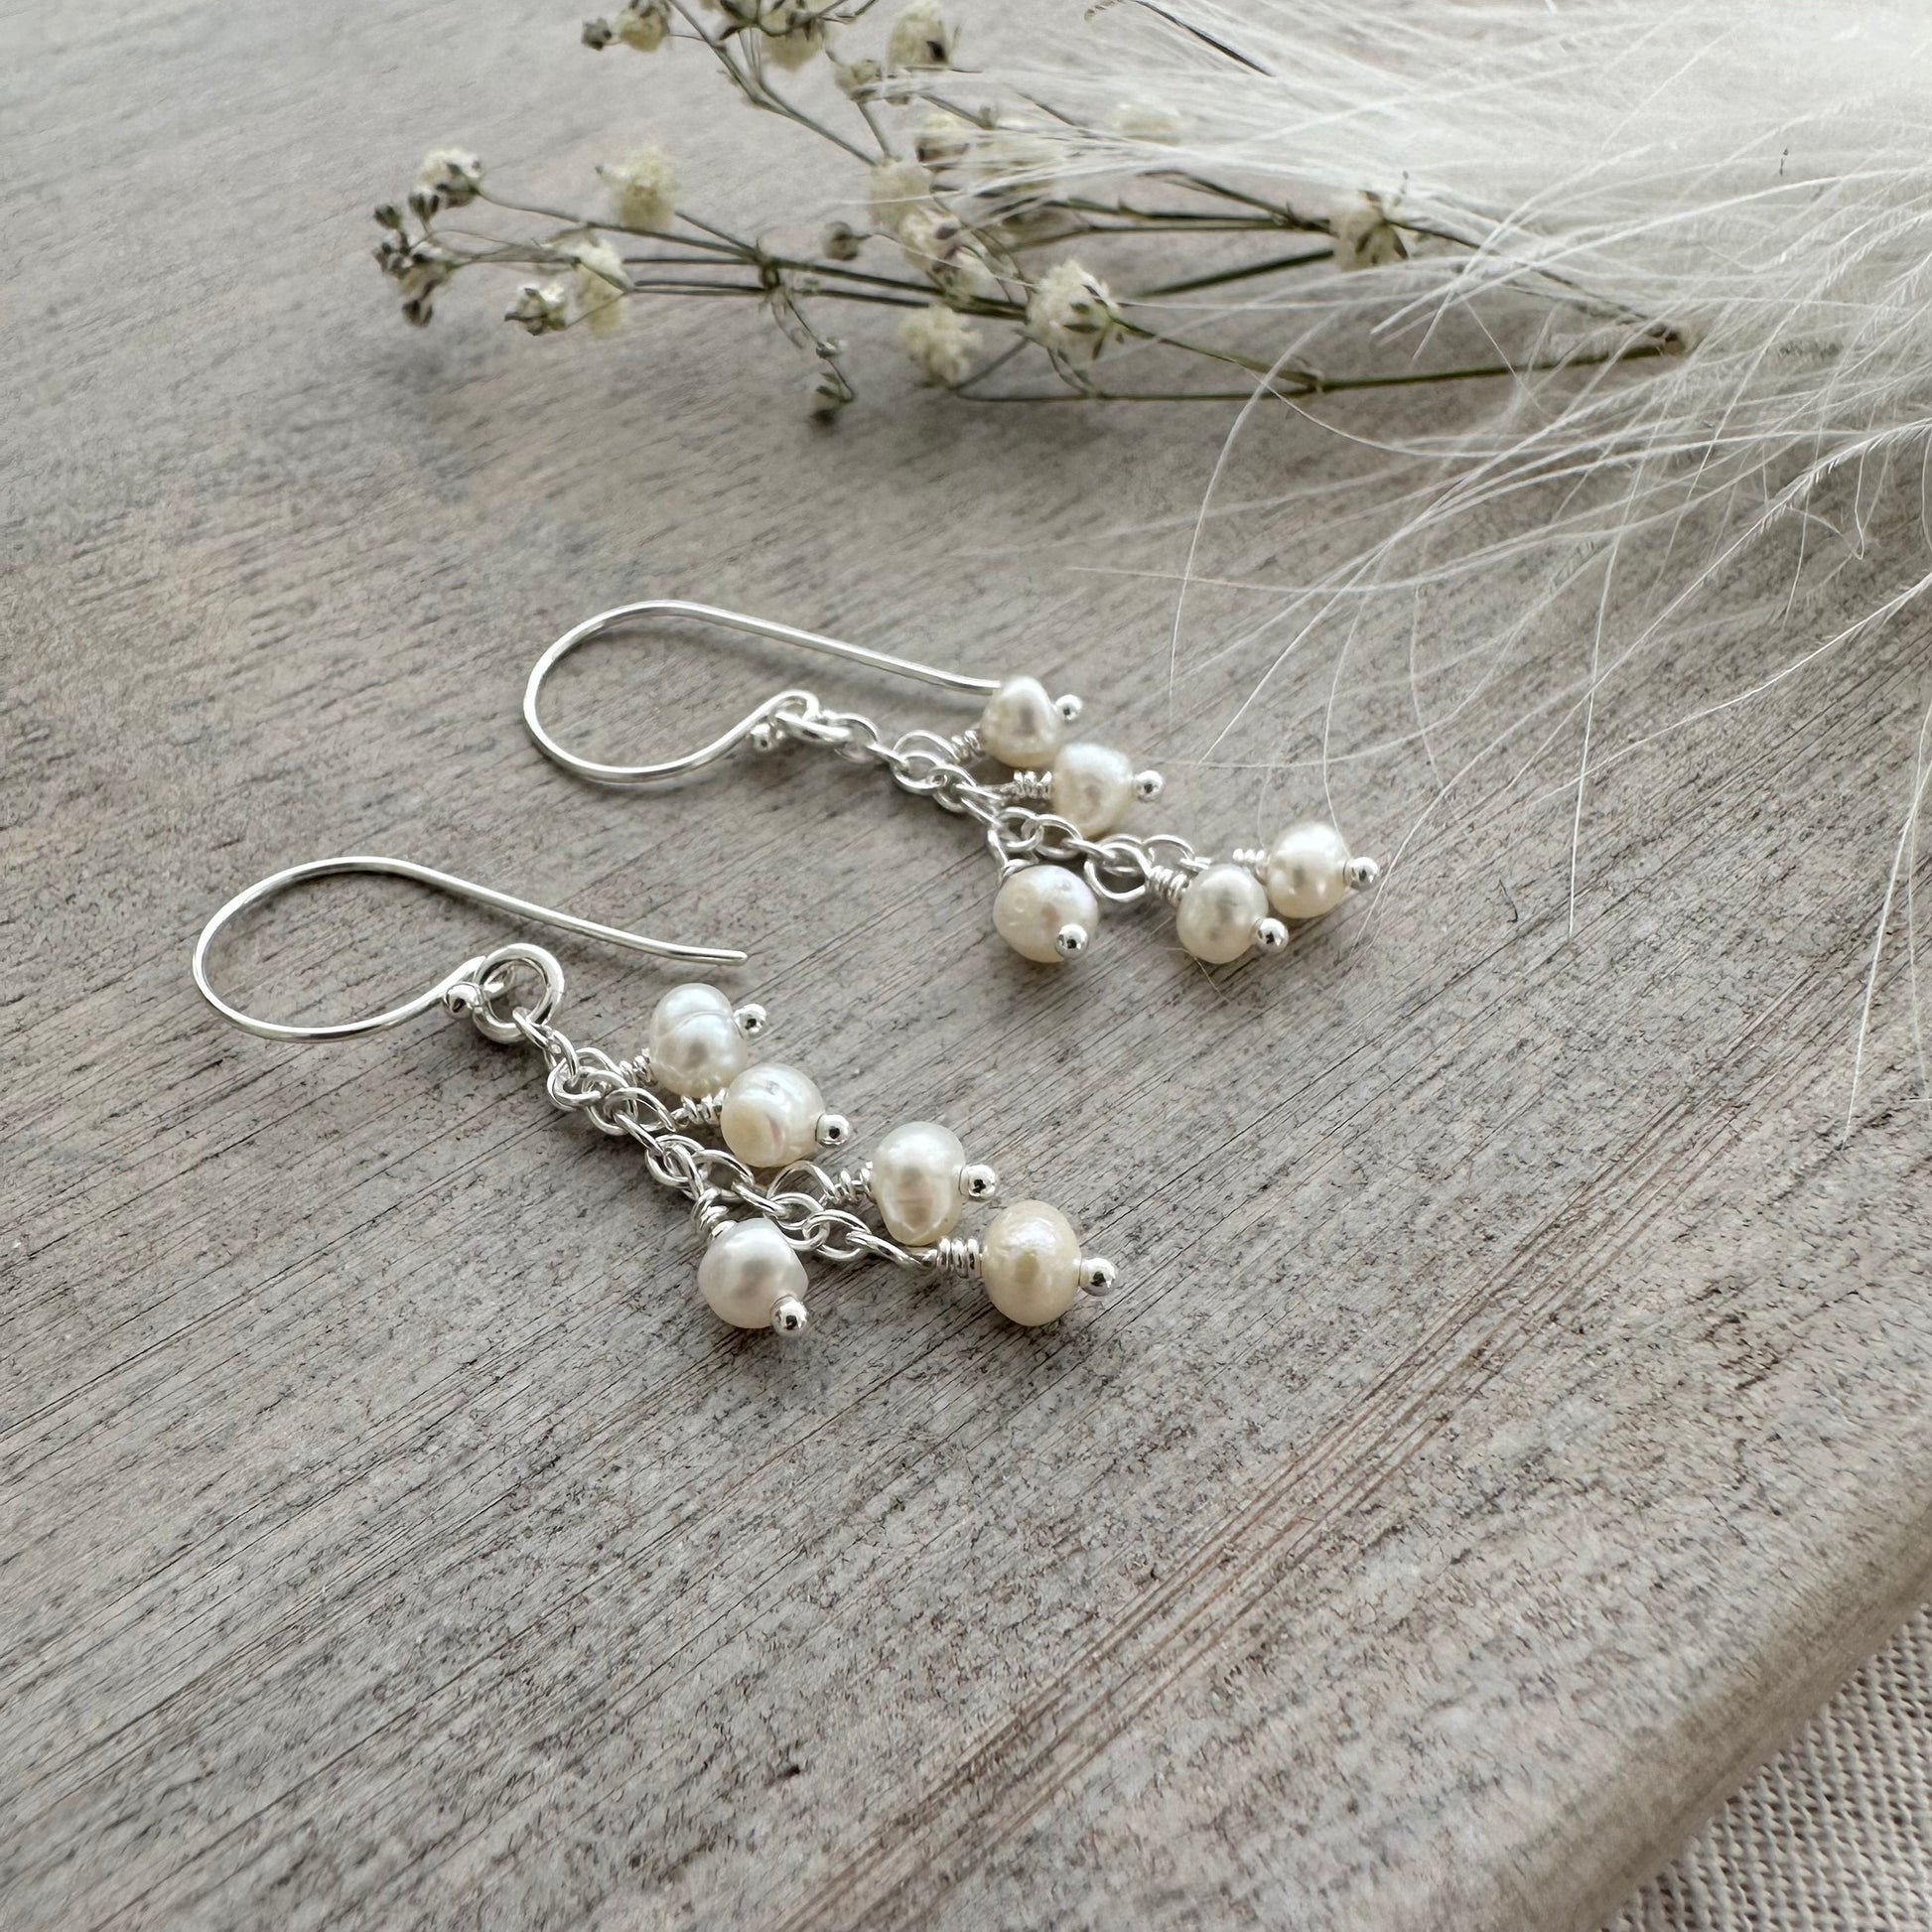 Dainty Ivory Pearl Drop Earrings for birthday, June Birthstone and Sterling Silver Made to order jewellery gift for women